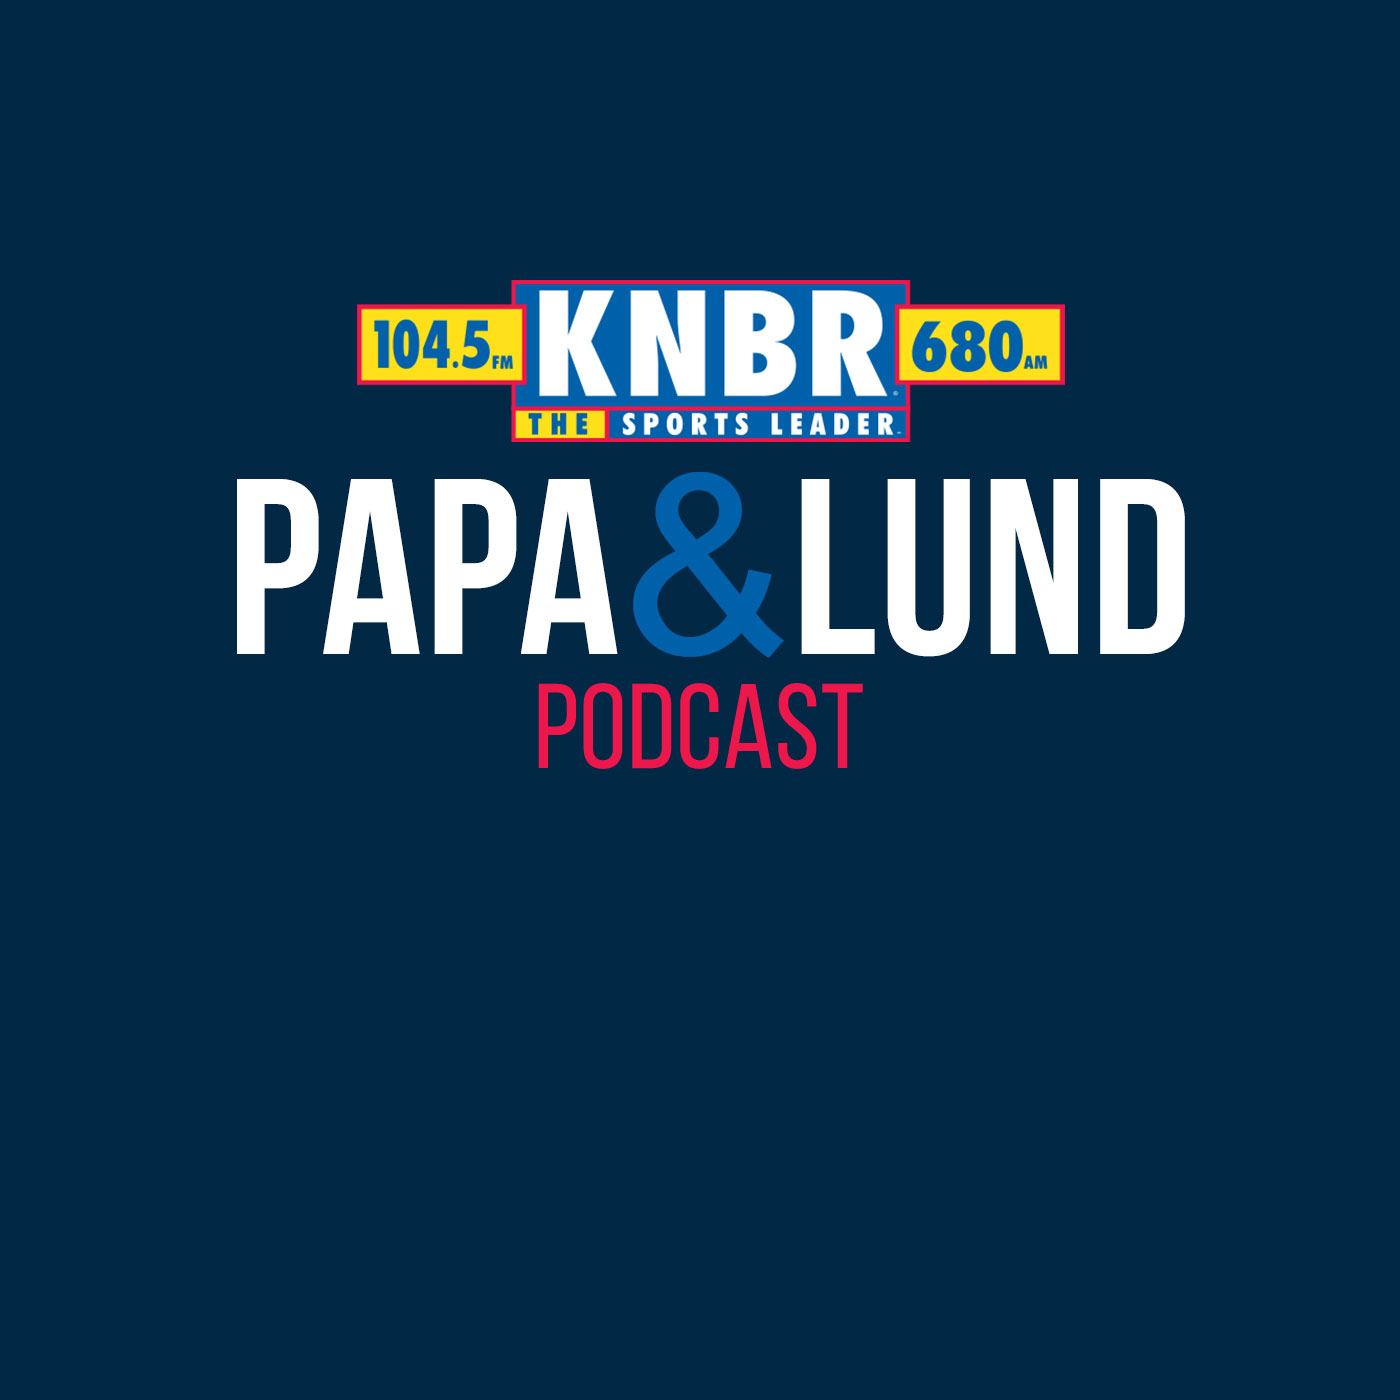 4-12 Sam Gordon joins Papa & Crowley to discuss the great position the Warriors are in entering their next game against the Pelicans and what potential challenges they may face in the Play-In tournament